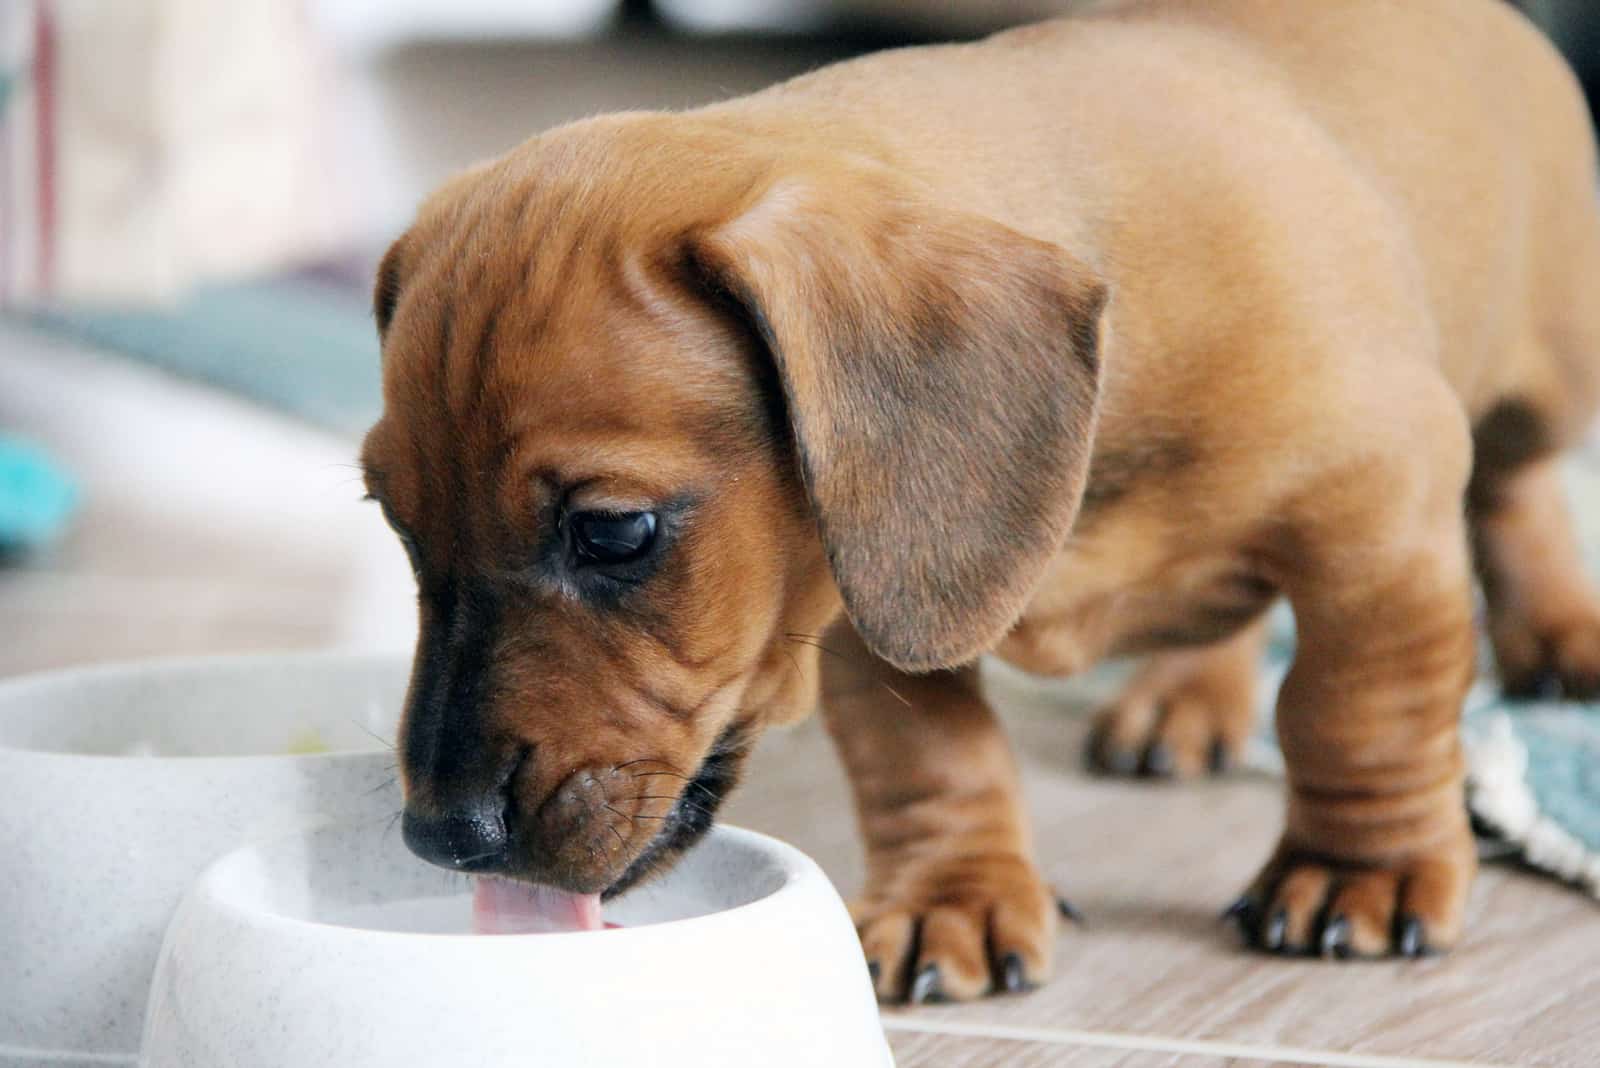 the puppy eats the dog from a white bowl